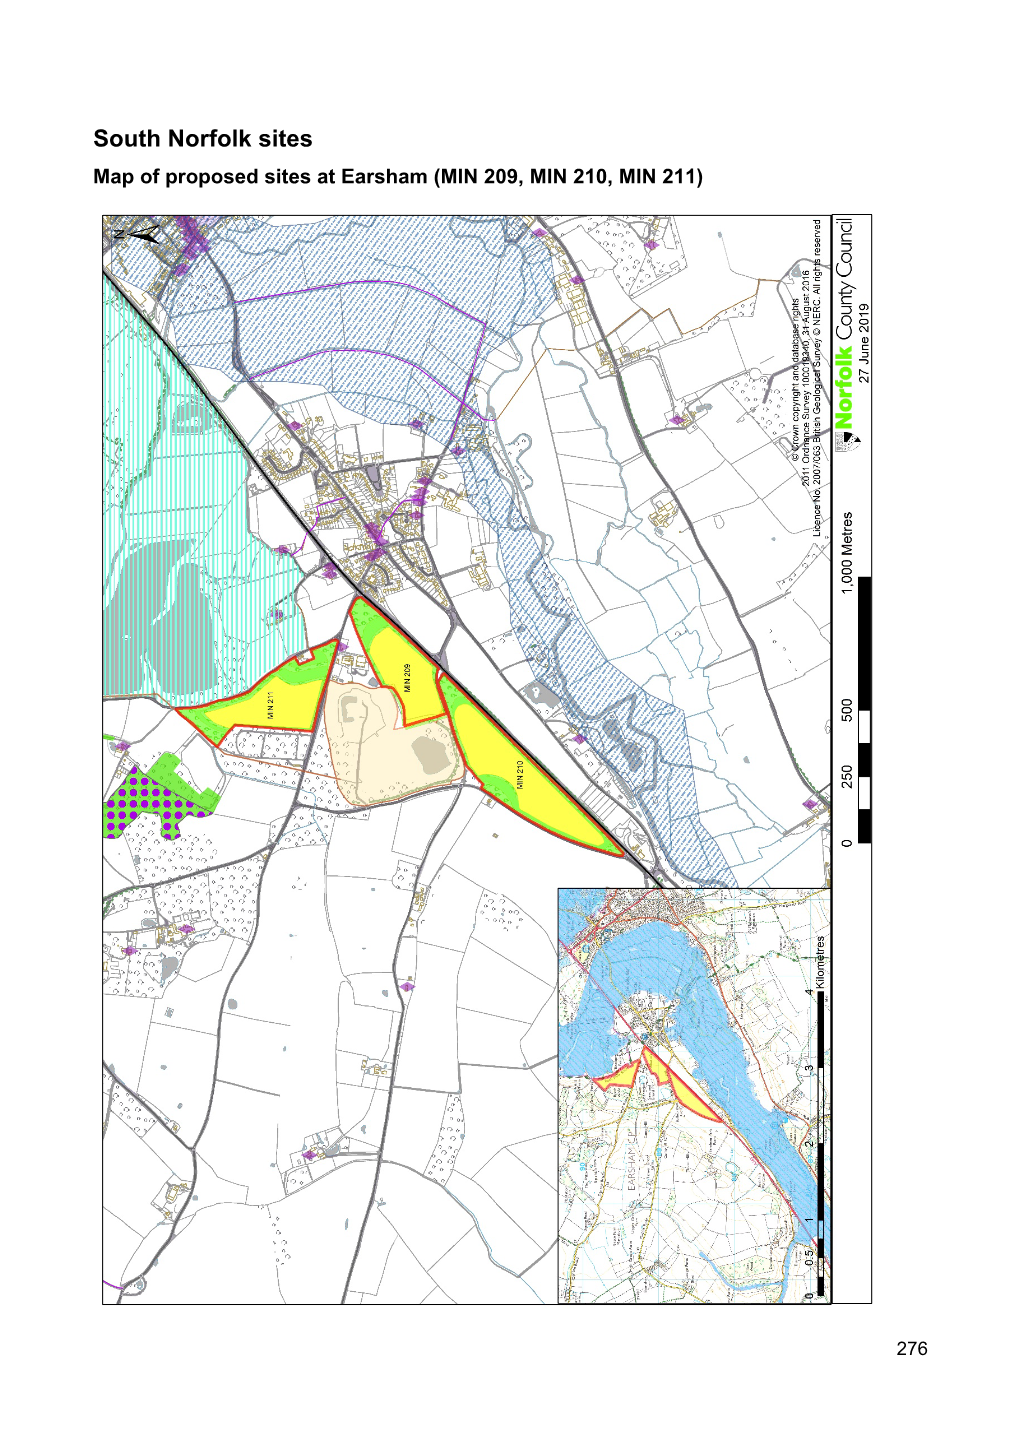 South Norfolk Sites Map of Proposed Sites at Earsham (MIN 209, MIN 210, MIN 211)